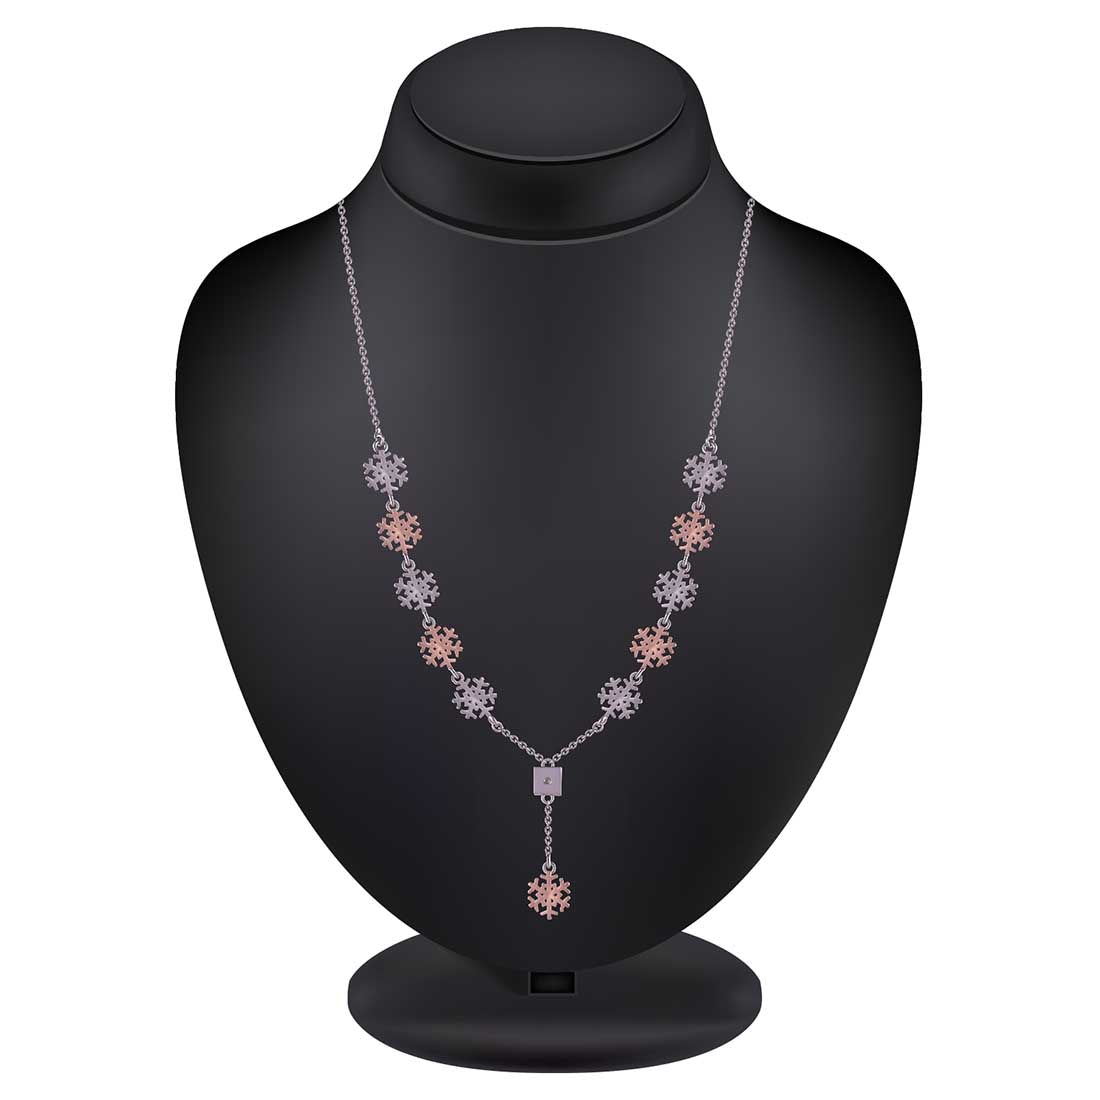 Snow-Flake Necklace With Earring Set